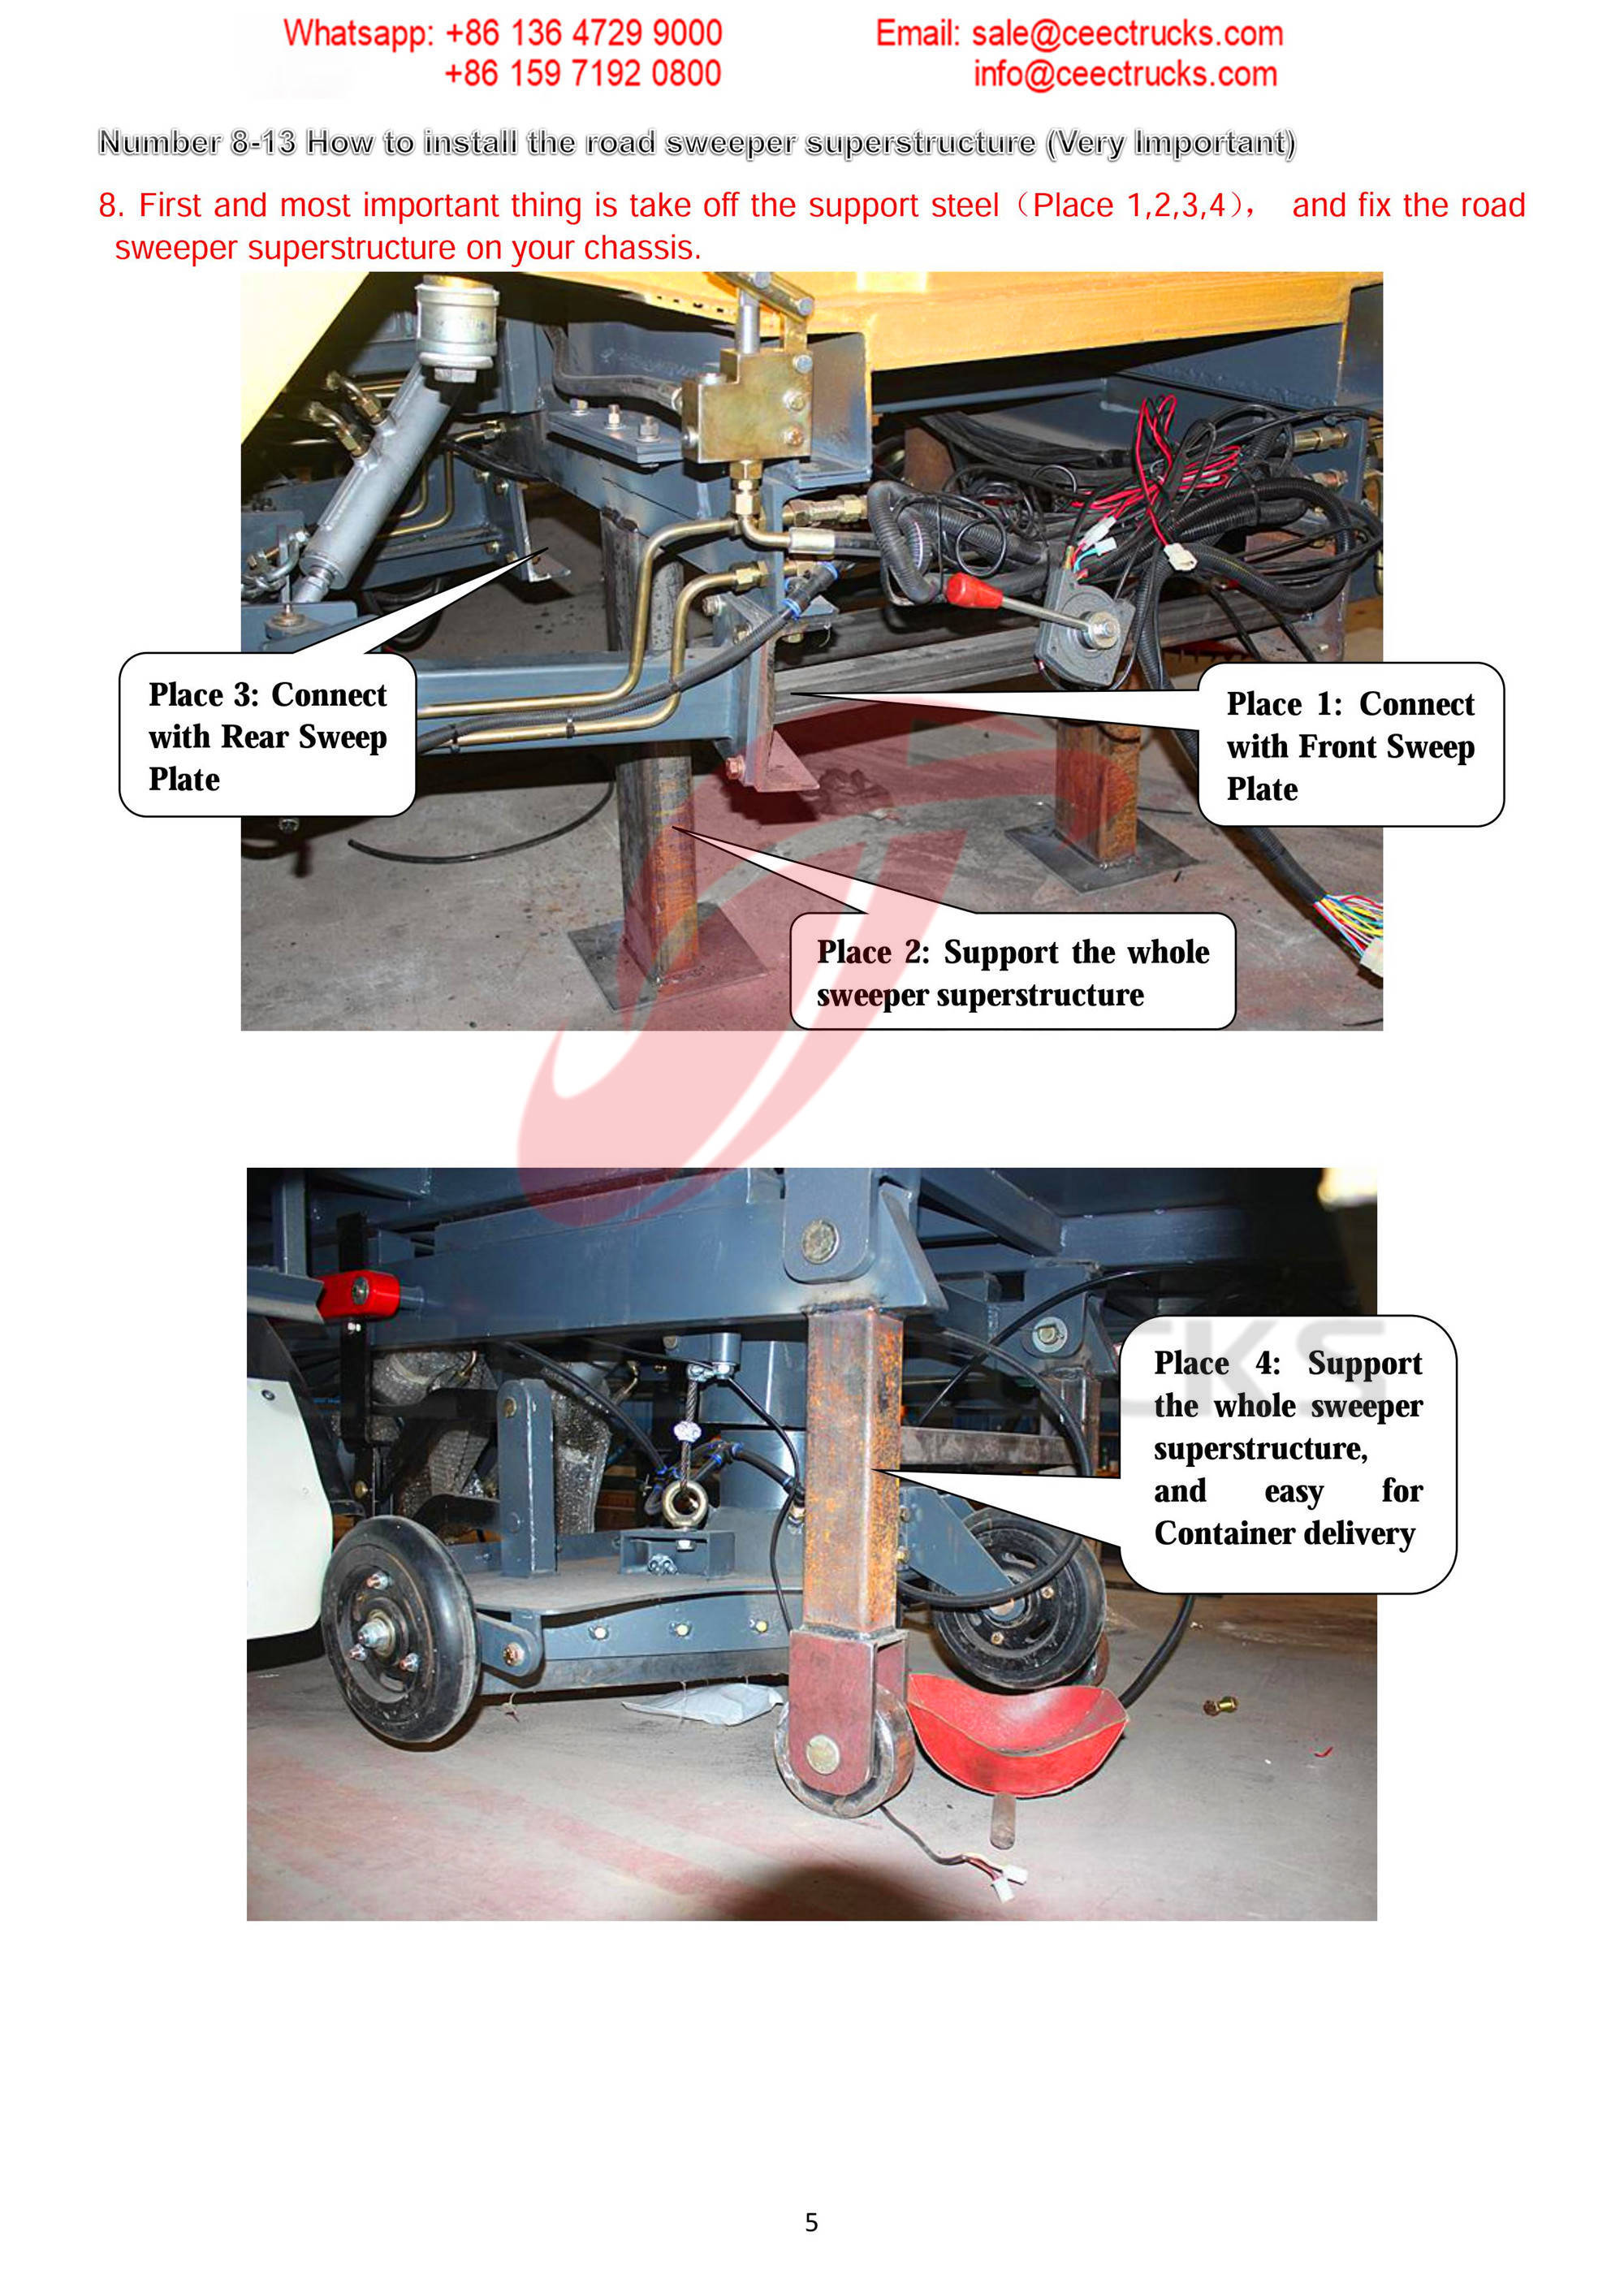 How to install road sweeper superstructure